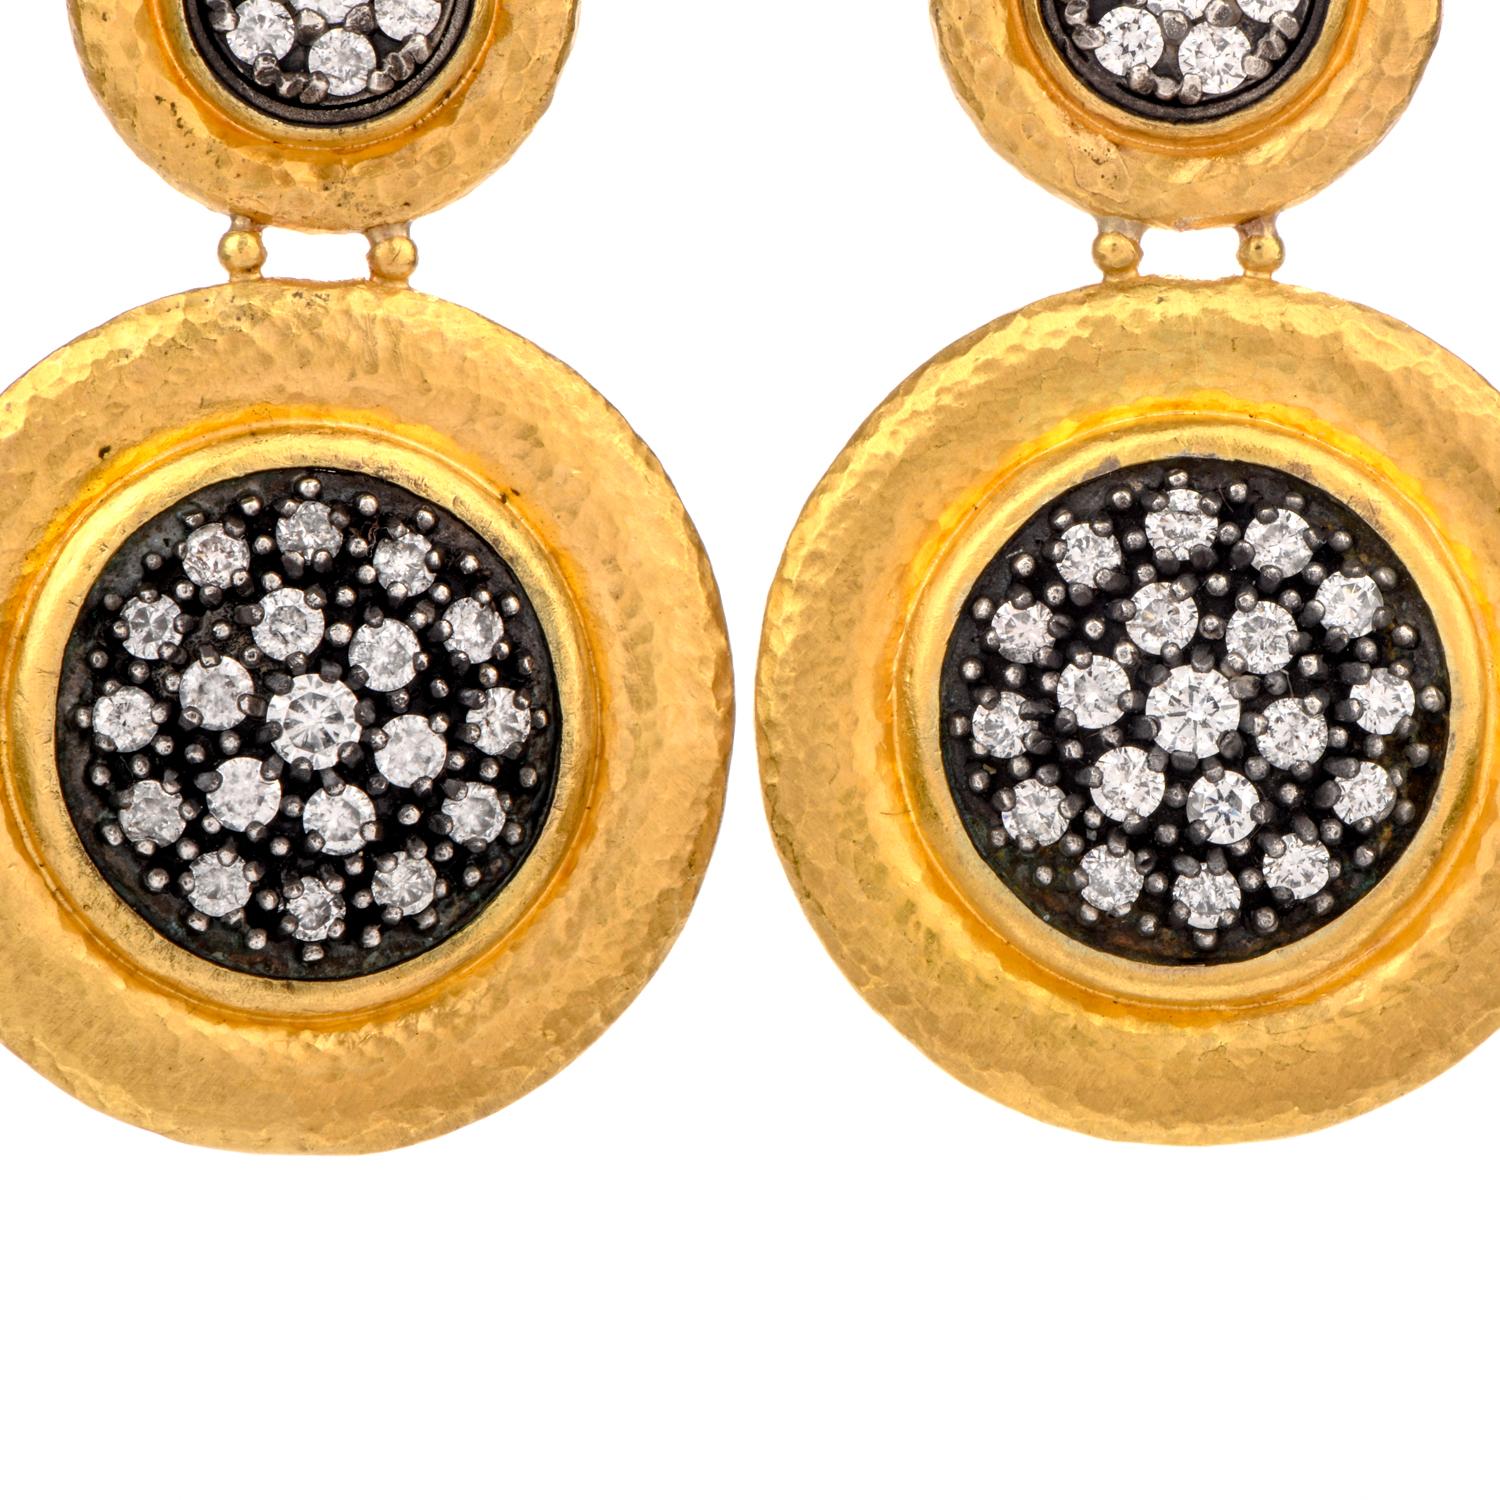 This visionary hand hammered earrings was created by Gurhan and 

crafted in pure 24 Karat gold.

A subtle hammered finish embellishes the surround while

round brilliant cut white diamonds lay amidst

a blackened silver .

Diamonds weigh